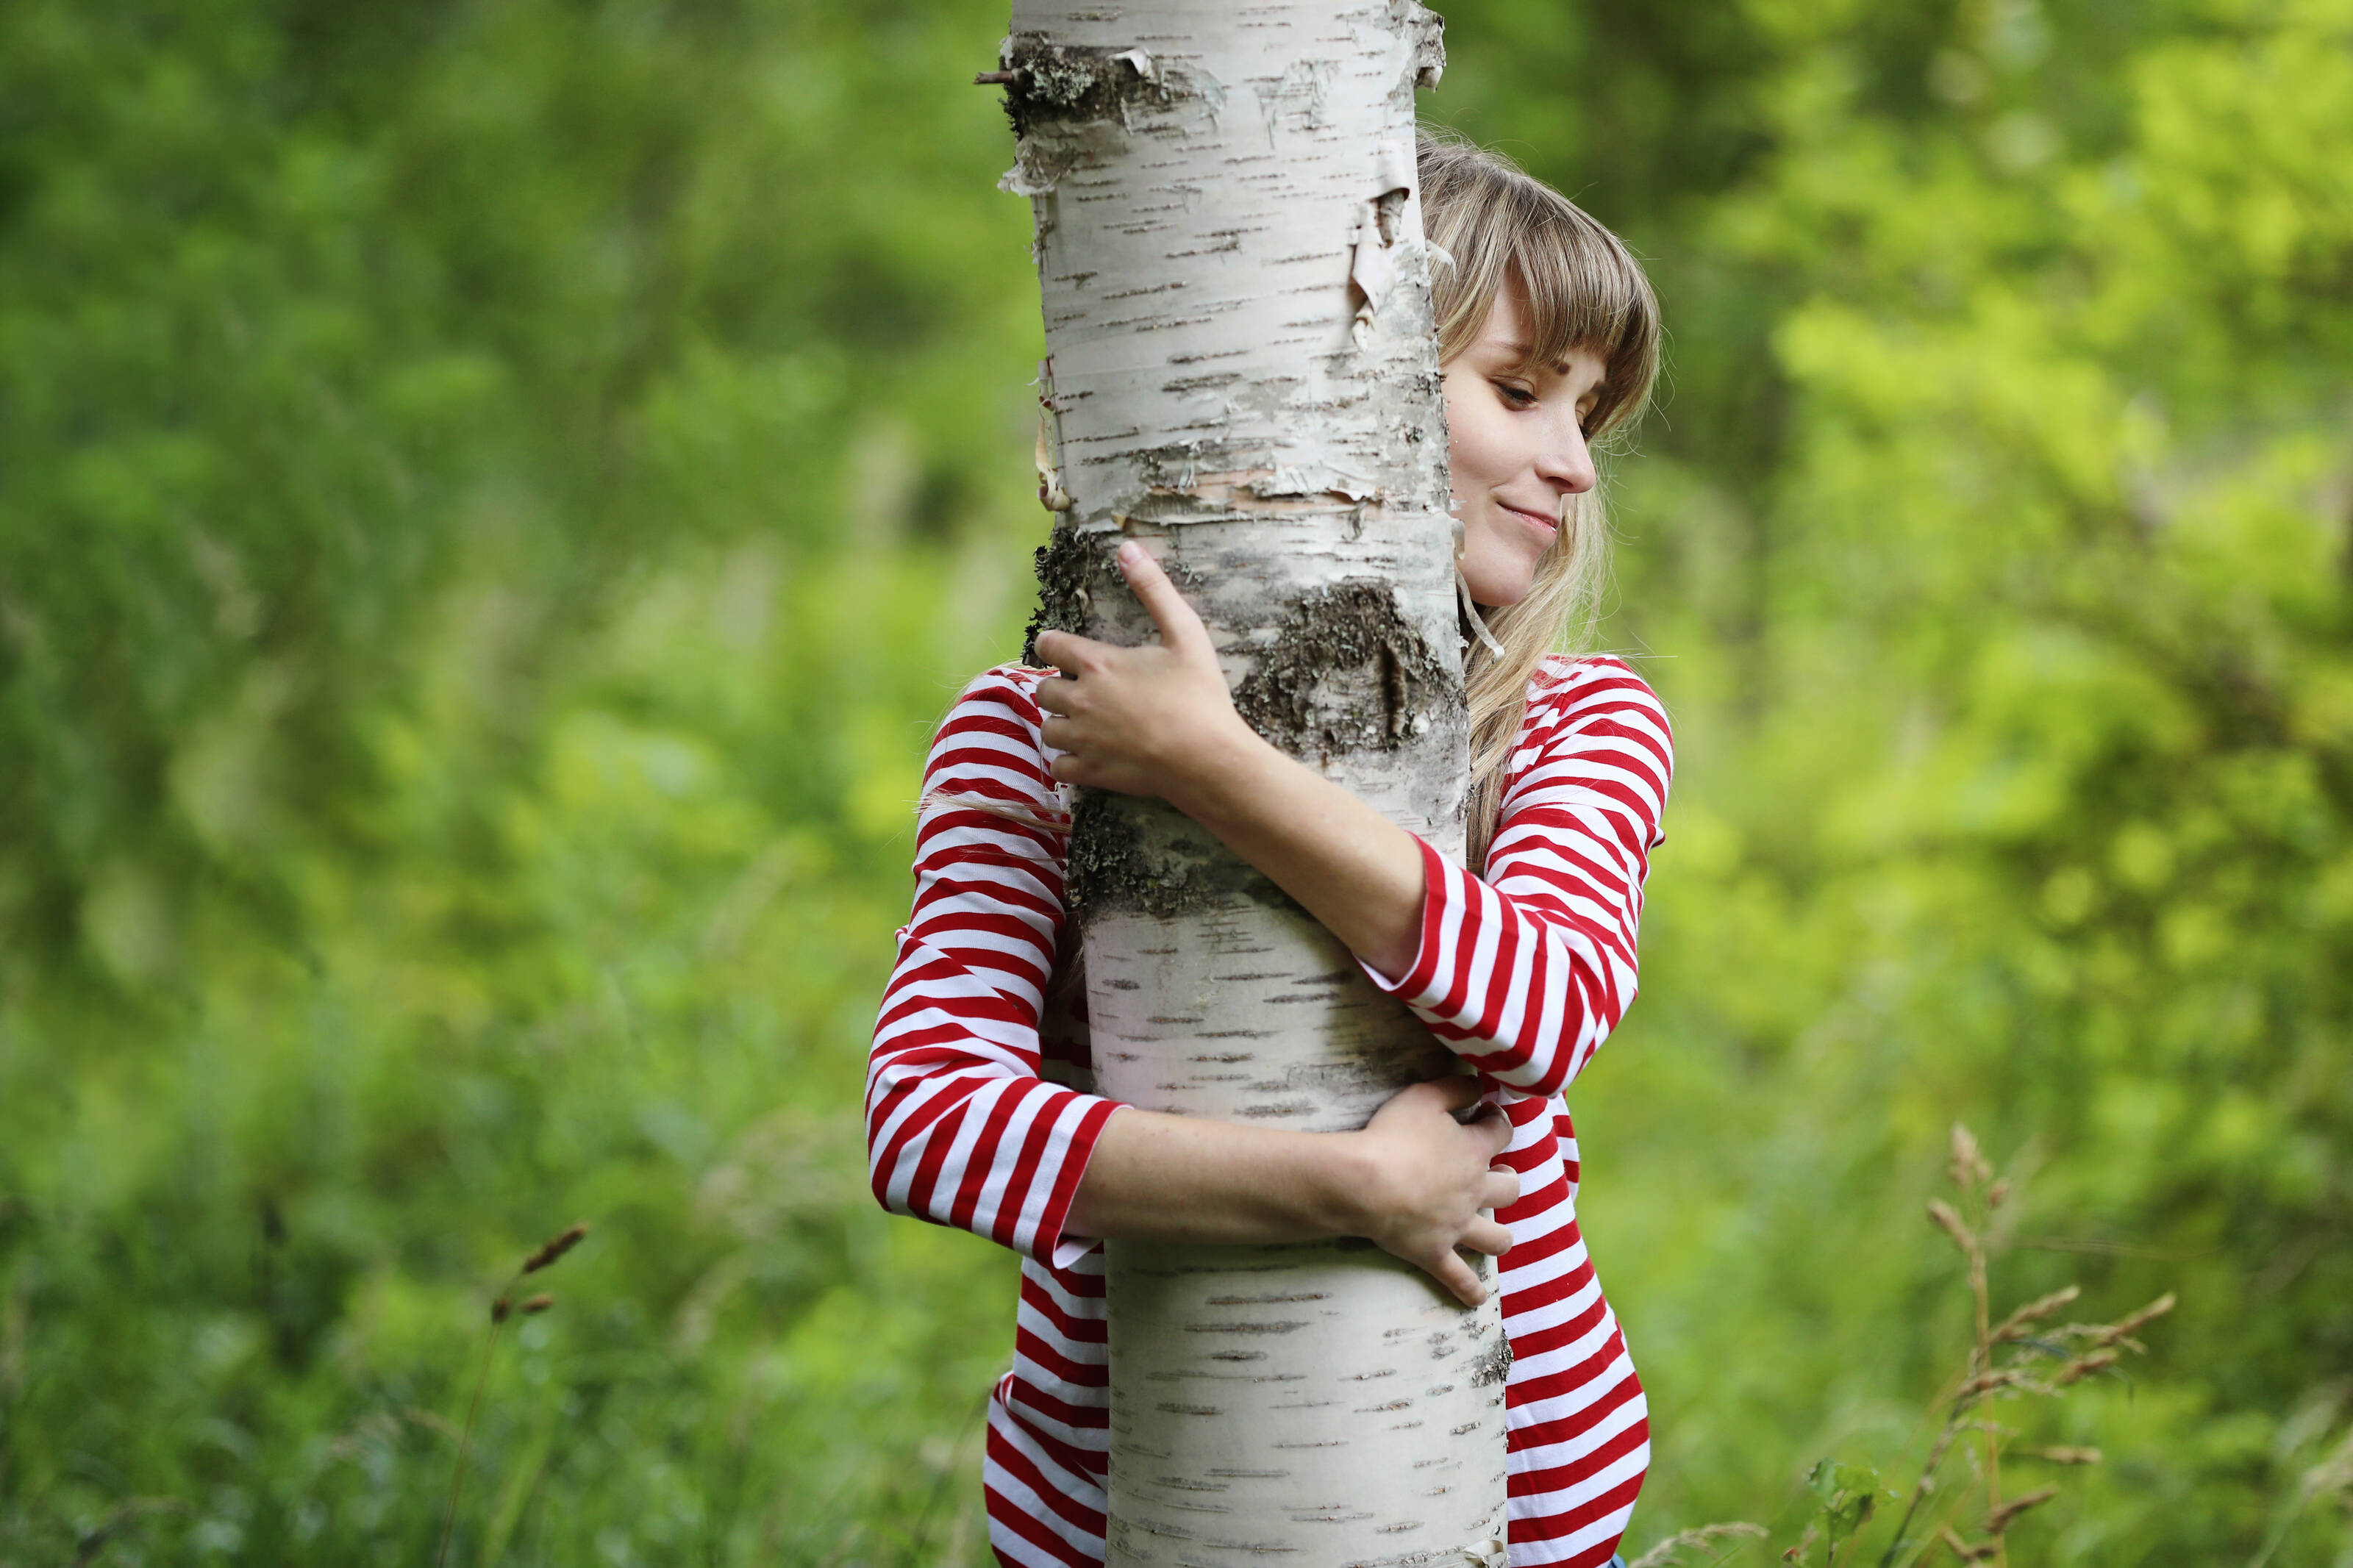 A blonde woman in a red and white striped shirt hugs a birch tree.